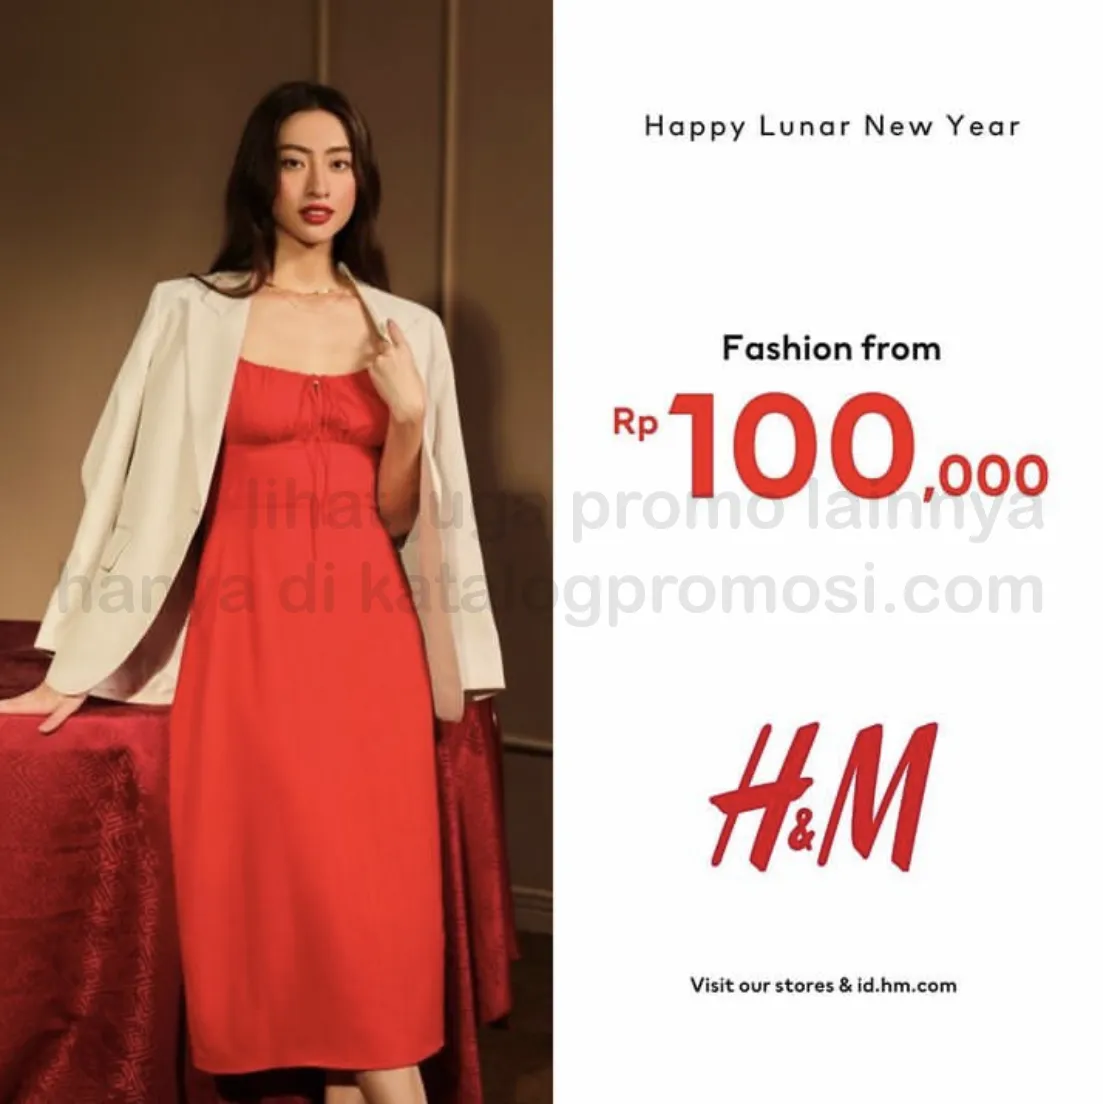 Promo H&M Happy Lunar New Year Special - start from Rp 100.000